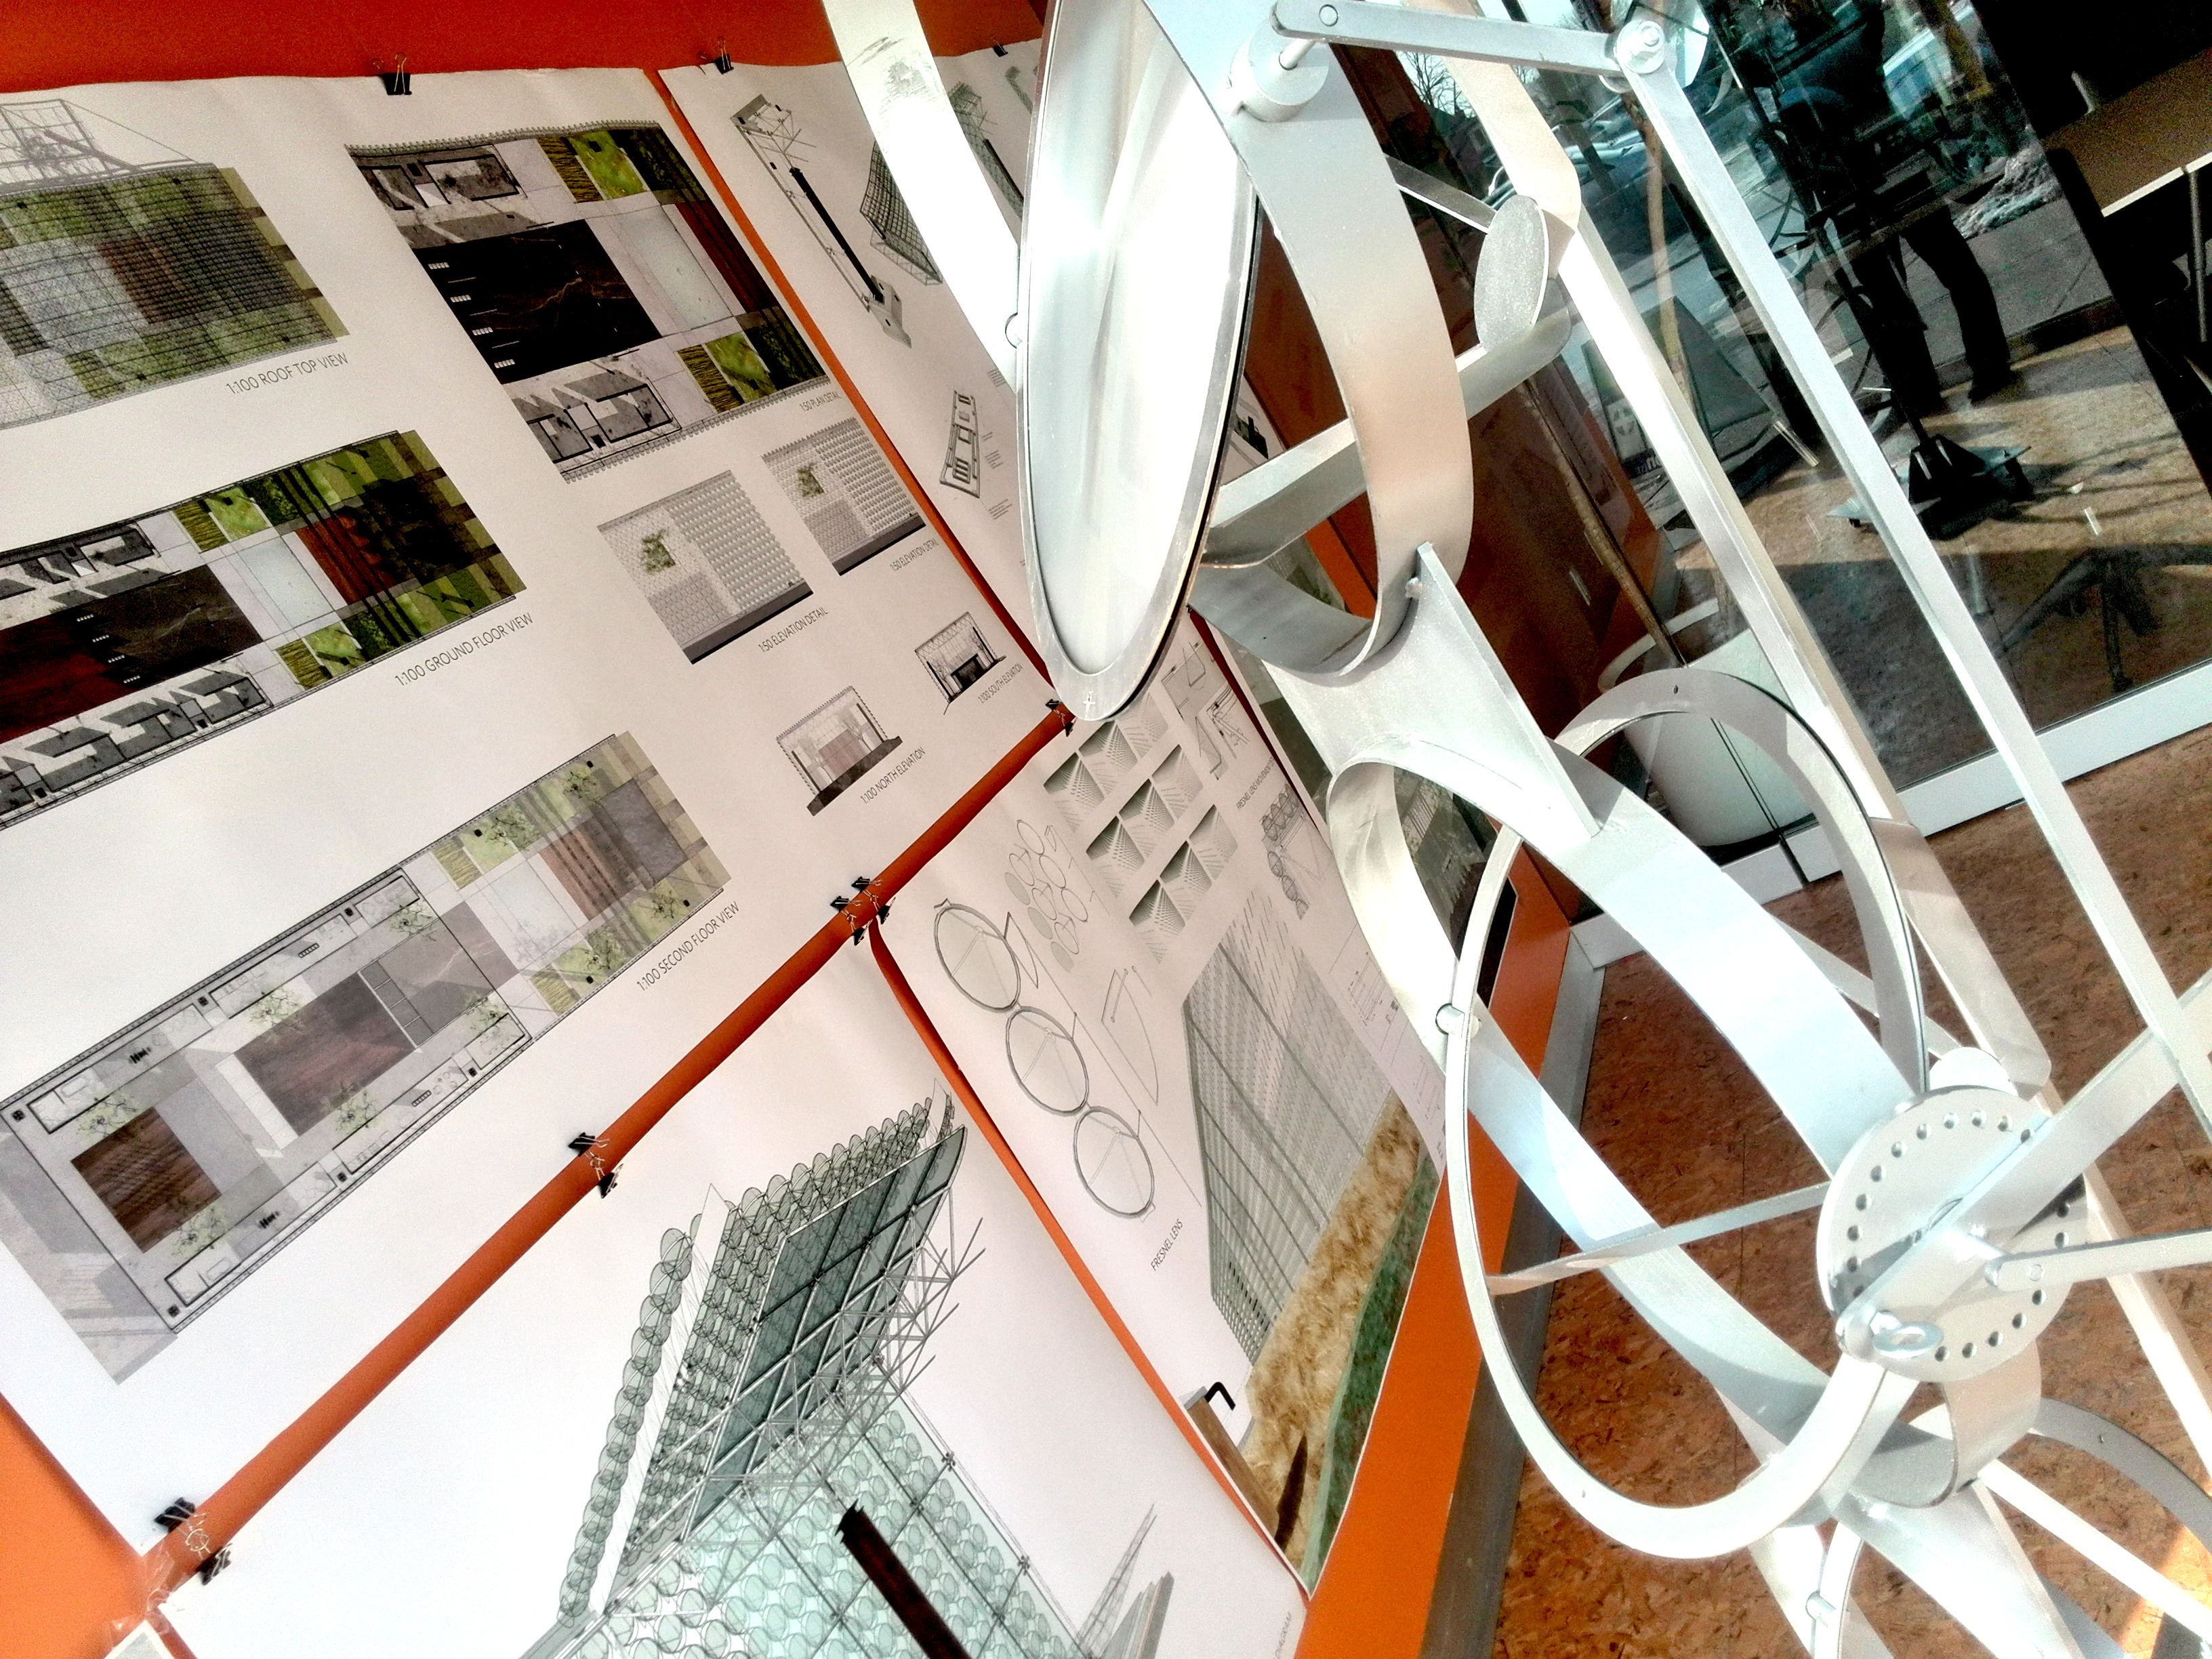 Call for Proposals for Passive Building Show August-September 2015